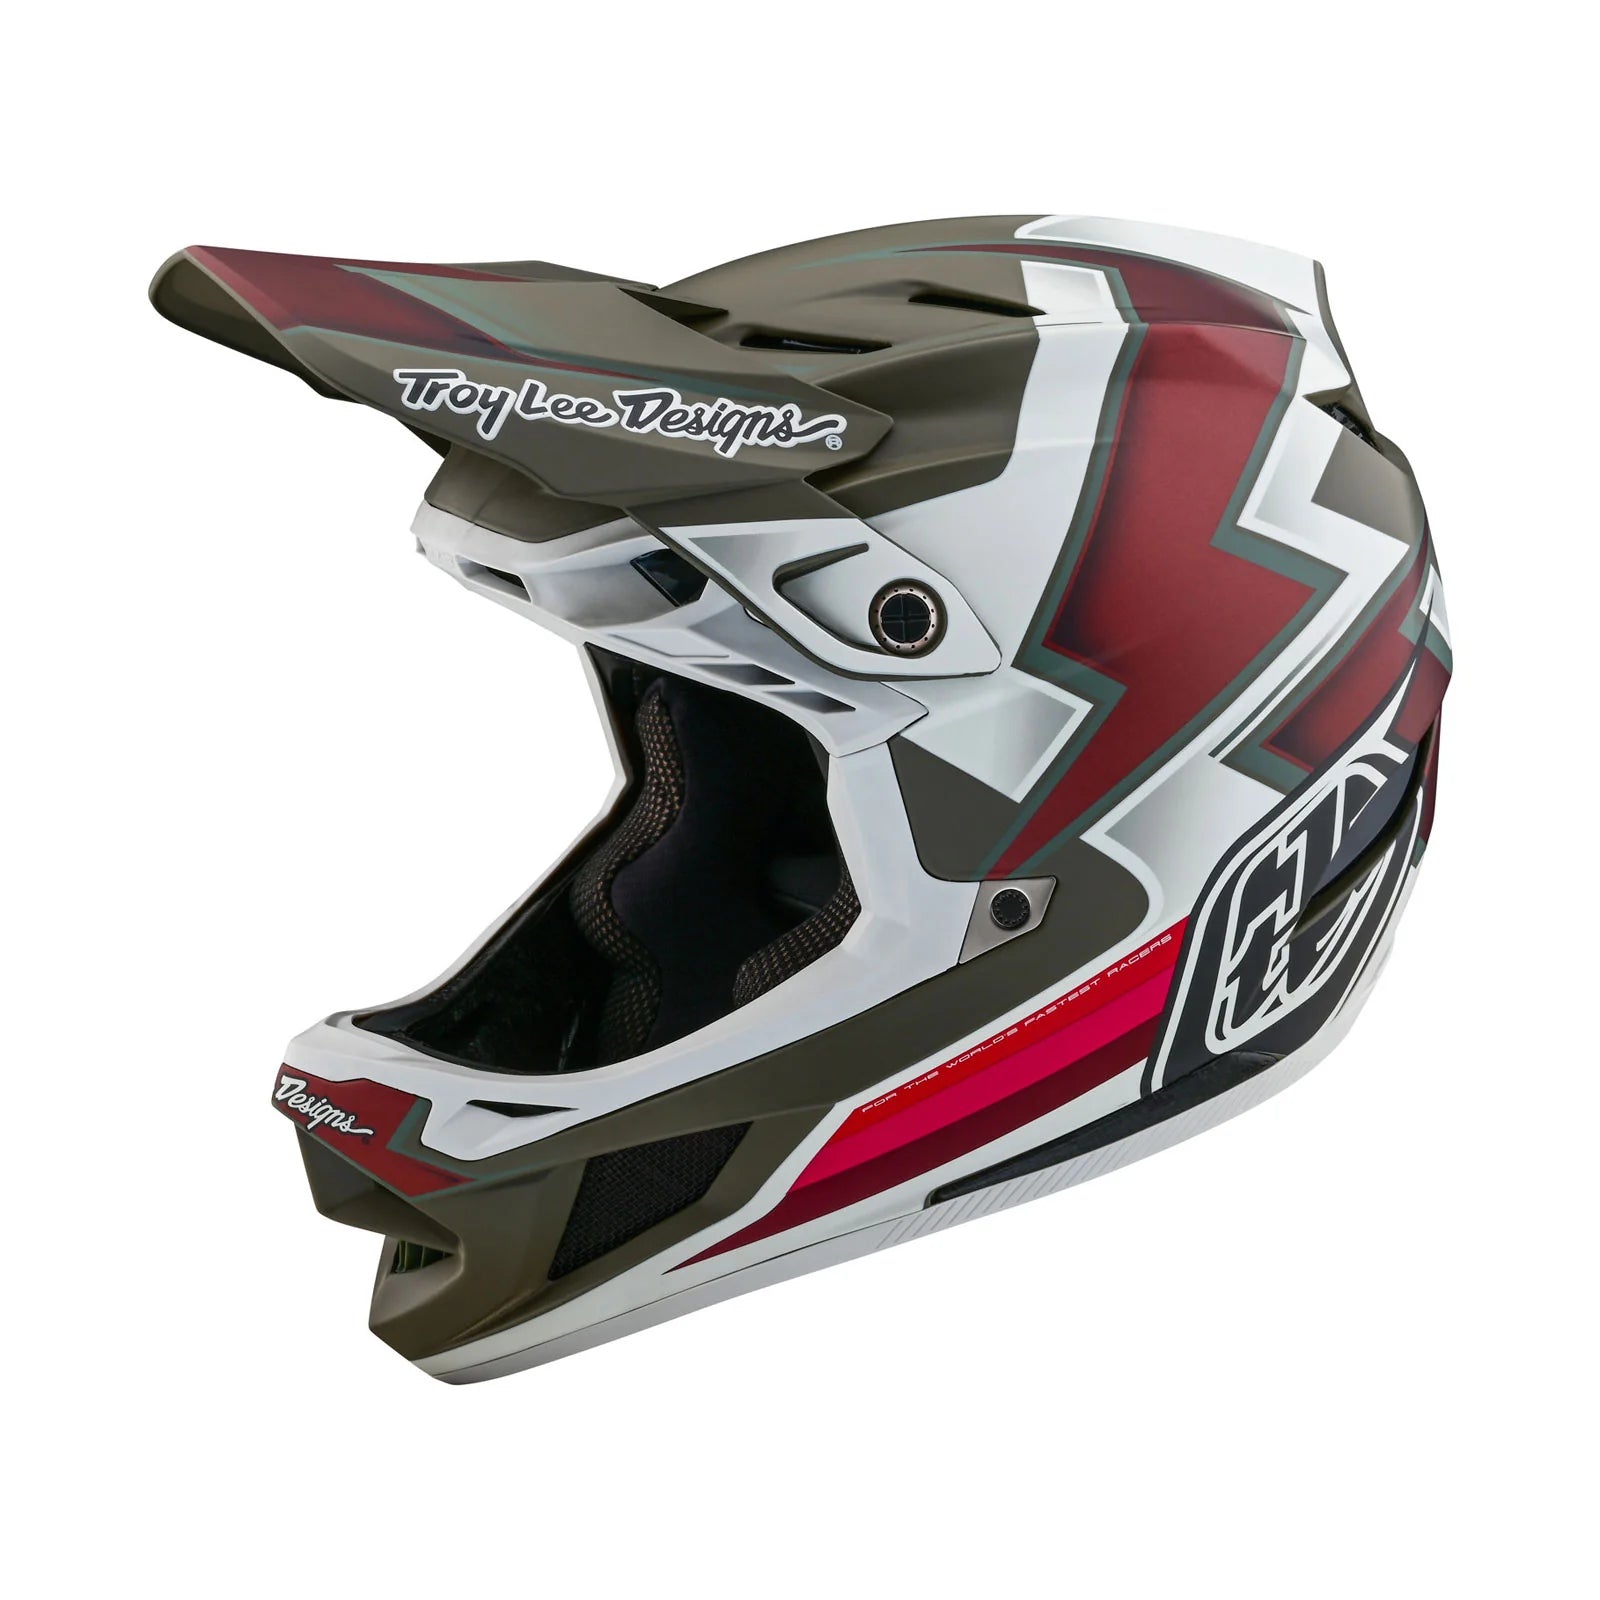 A TLD D4 AS Composite Helmet W/MIPS Ever Tarmac with a red and white design, enhanced for helmet safety with the Mips system.